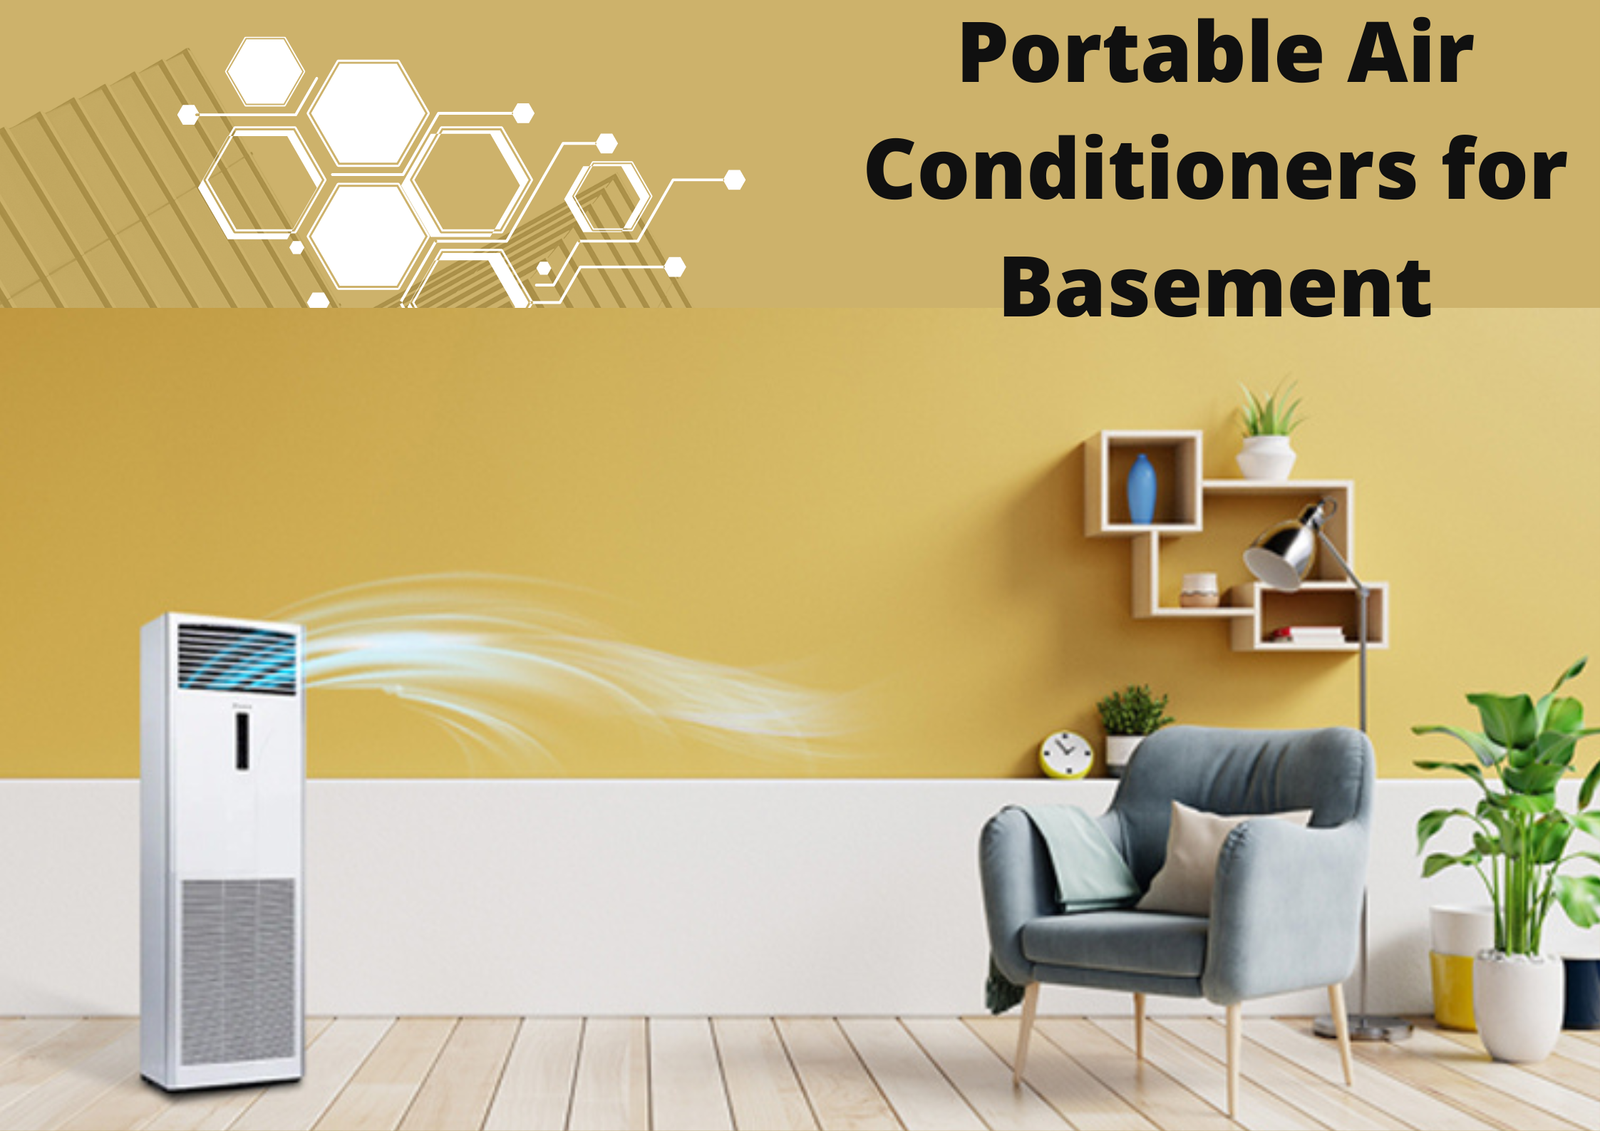 Portable Air Conditioners for Basement